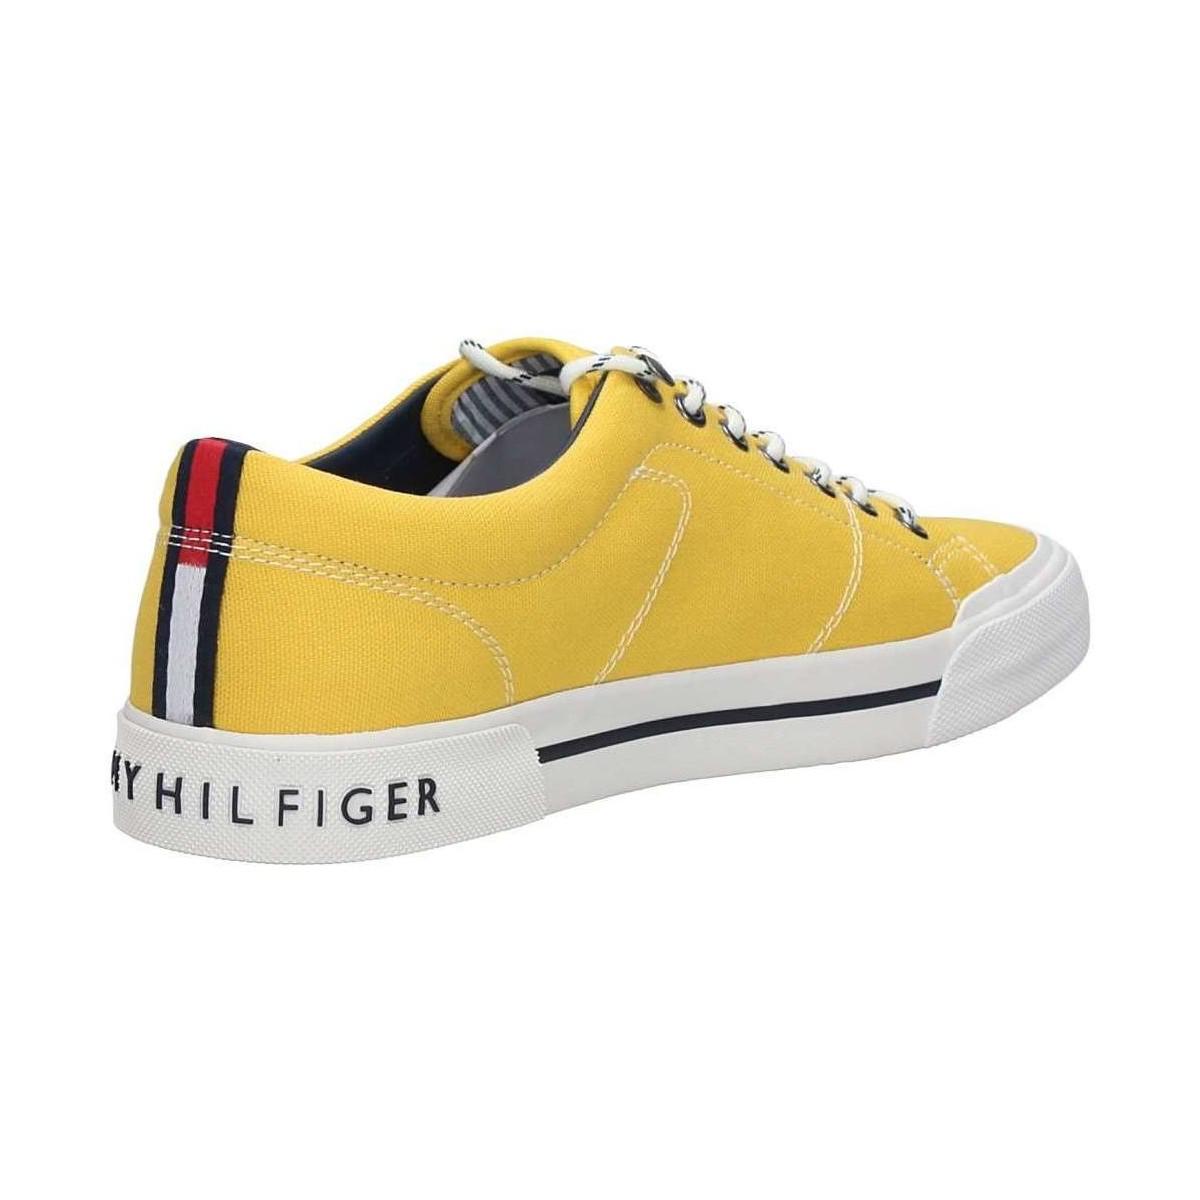 tommy hilfiger yellow shoes with bow